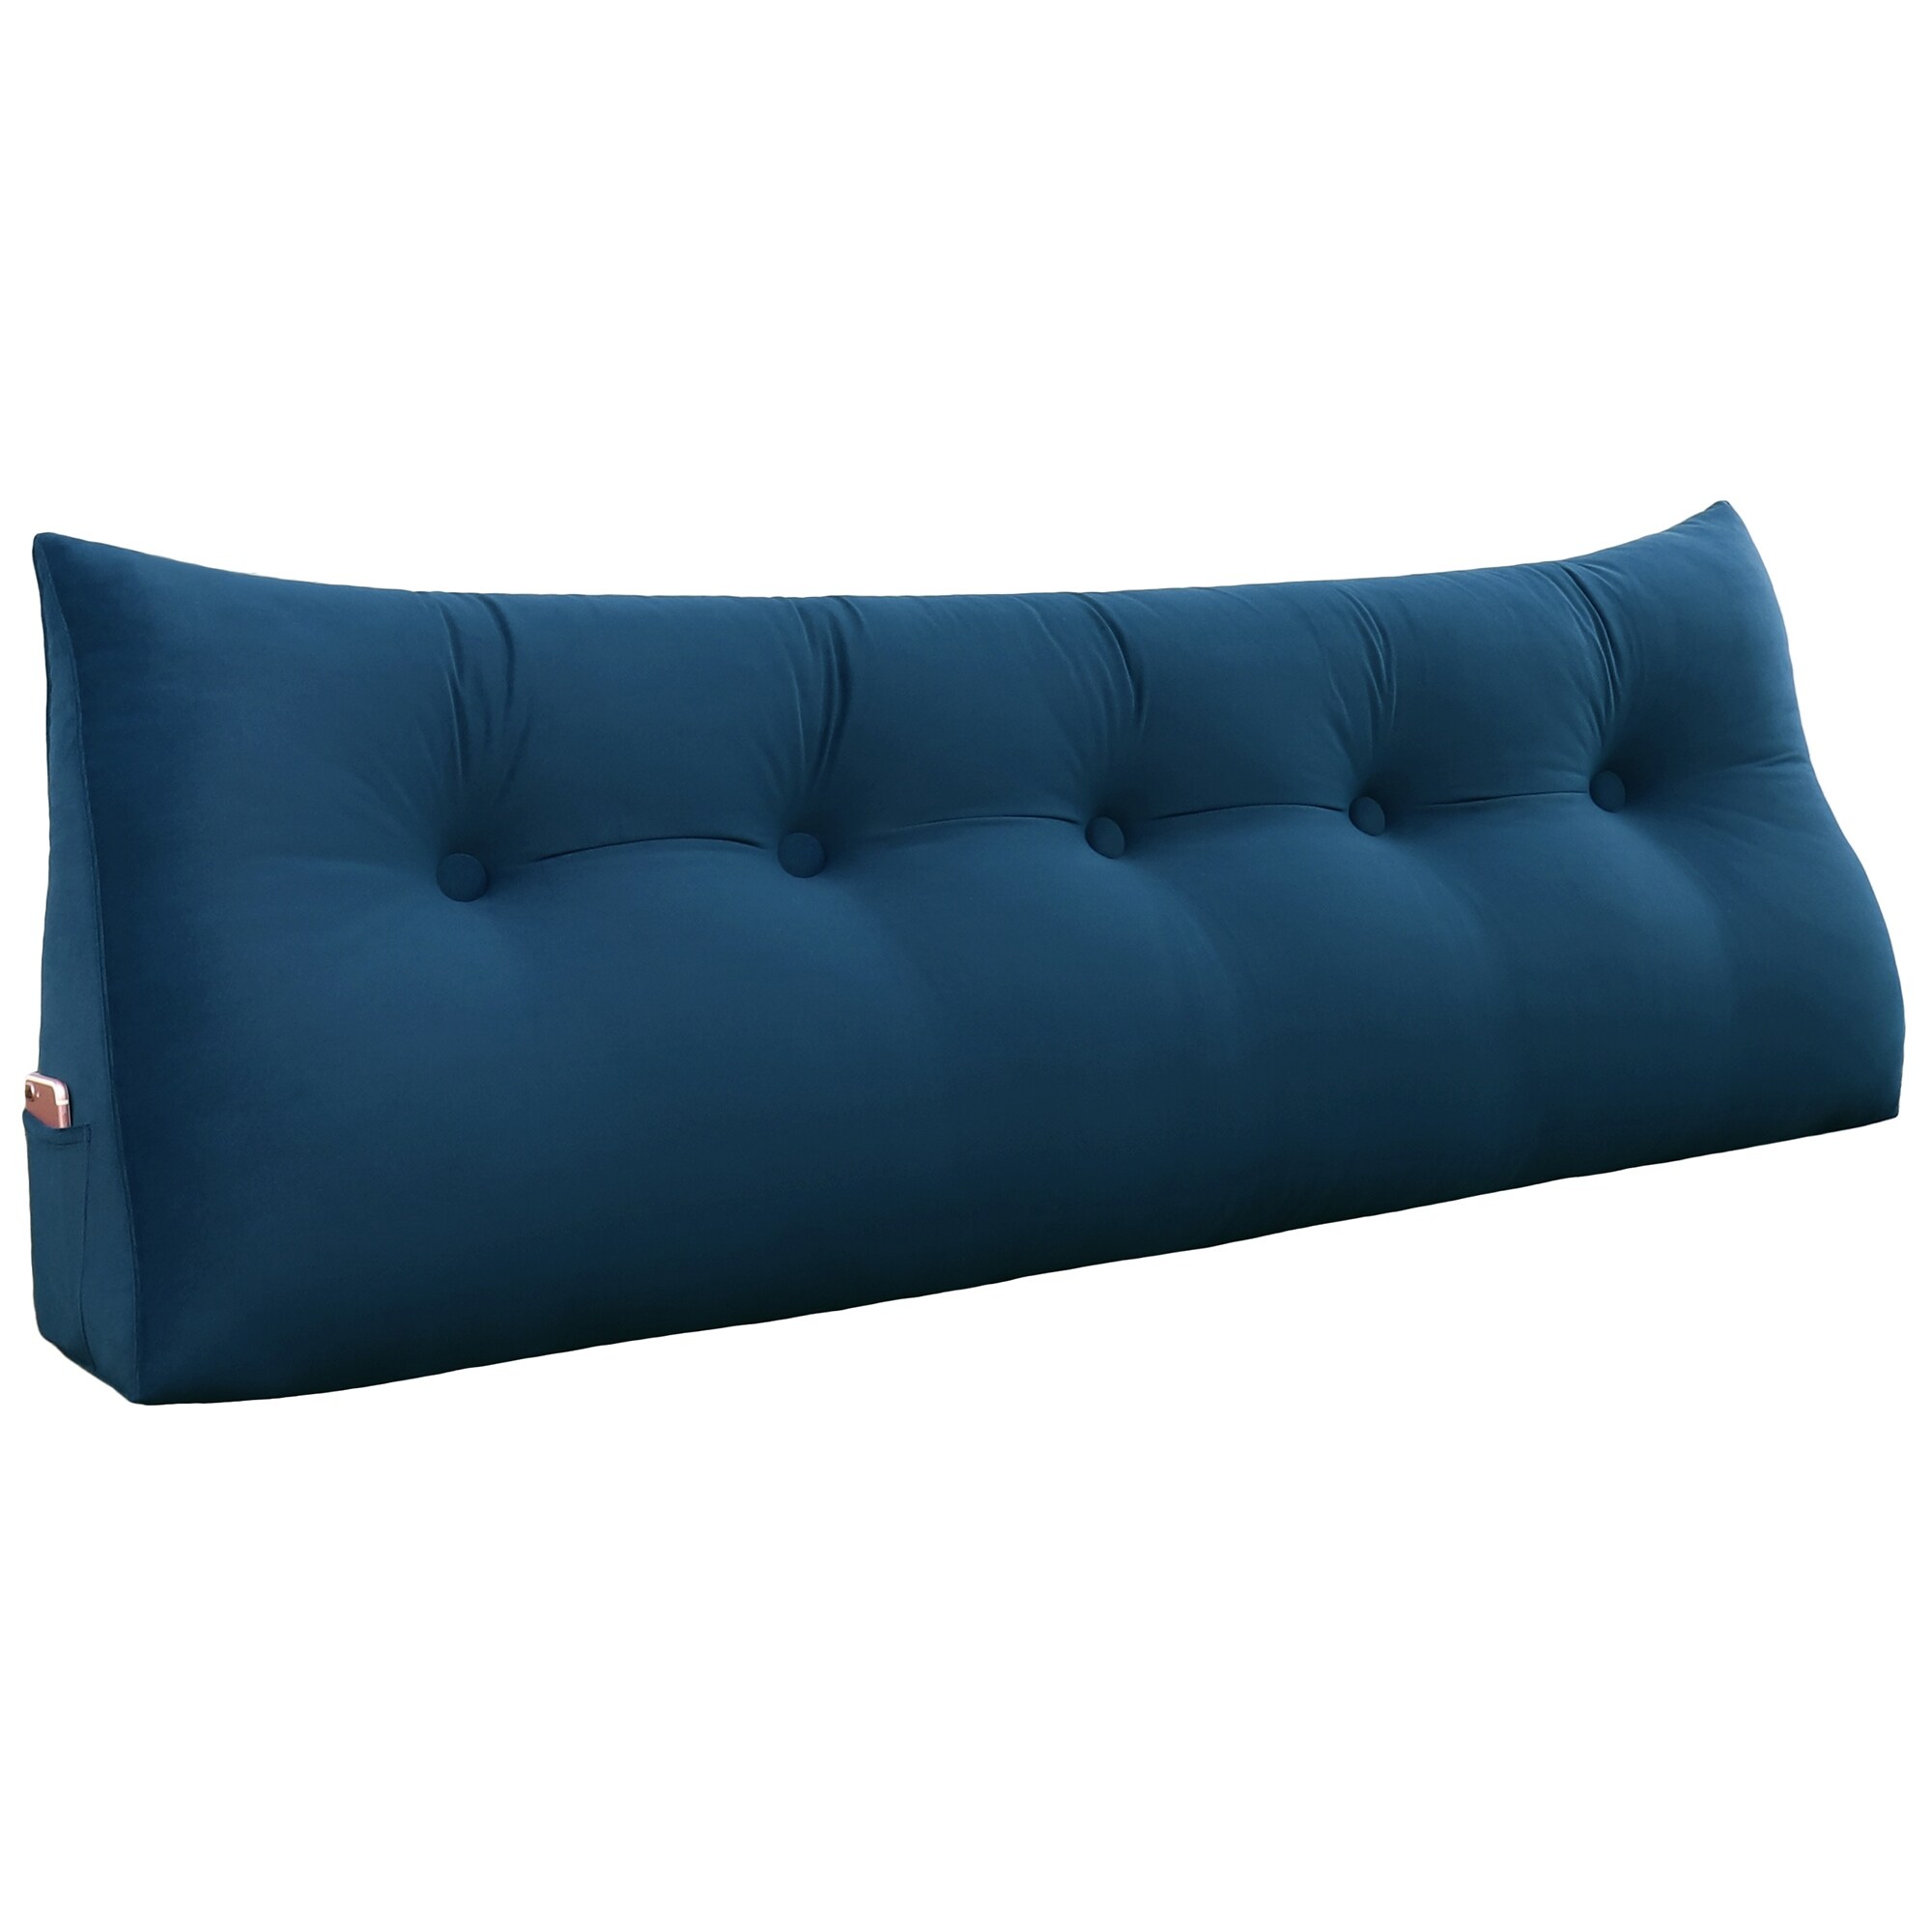 WOWMAX Bed Rest Wedge Reading Pillow Bolster Daybed Back Support - Bed Bath  & Beyond - 30356604